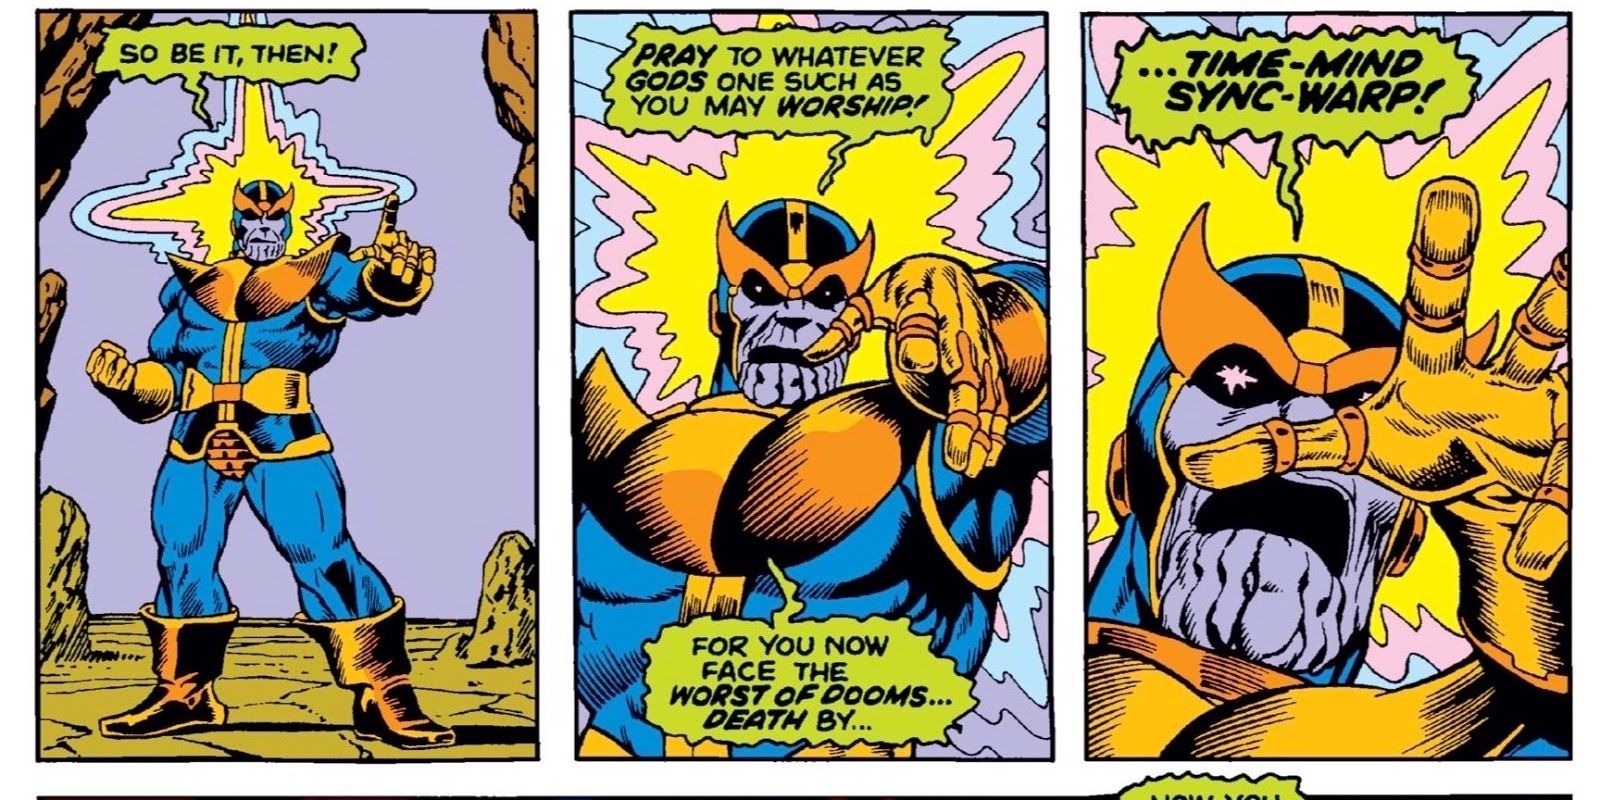 Thanos traps Drax’s mind in a Time-Mind Sync-Warp